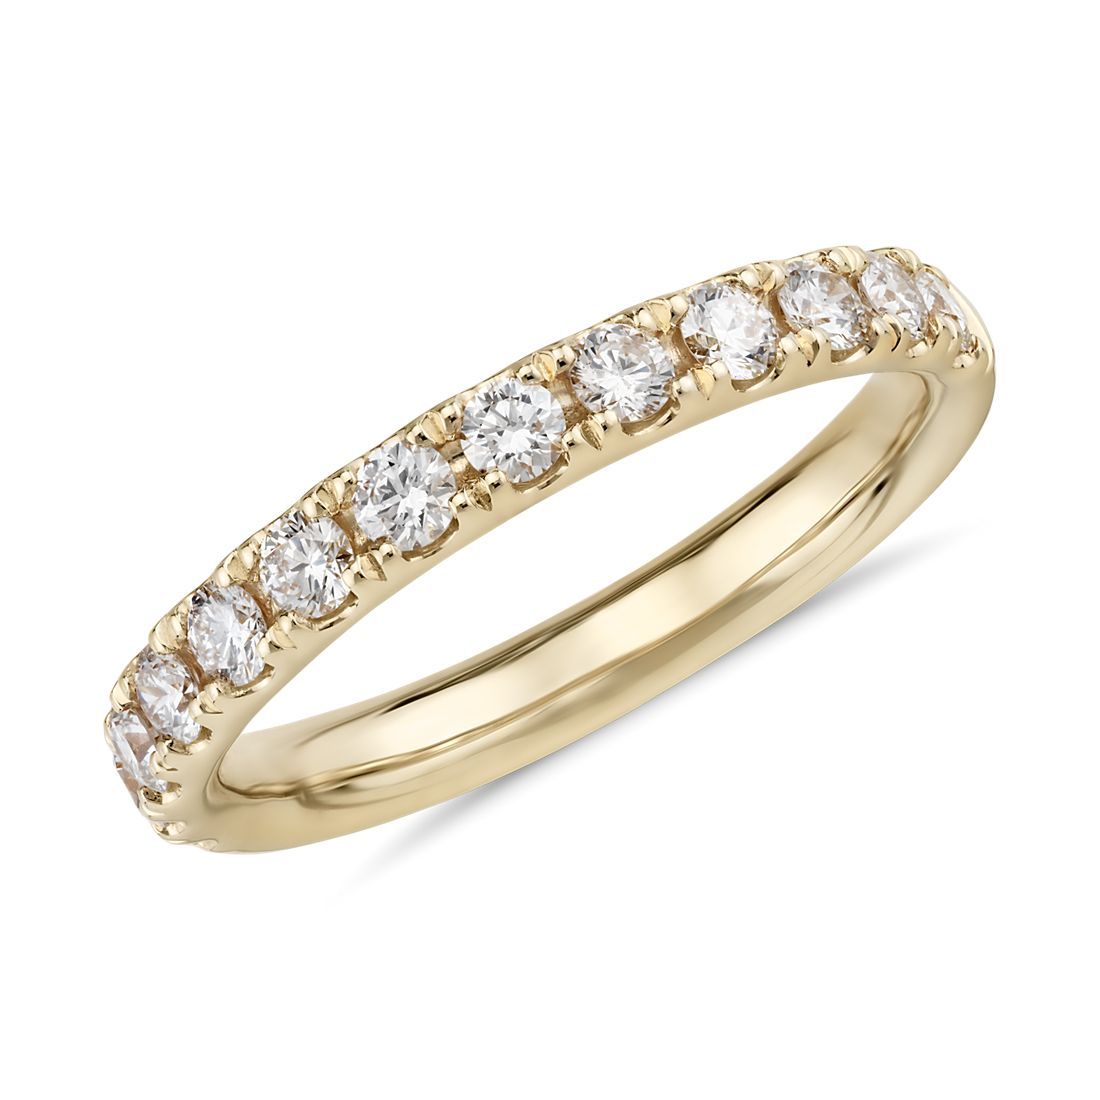 Riviera Pavé Diamond Ring in 18k Yellow Gold (1/2 ct. tw.) | Blue Nile | Blue Nile